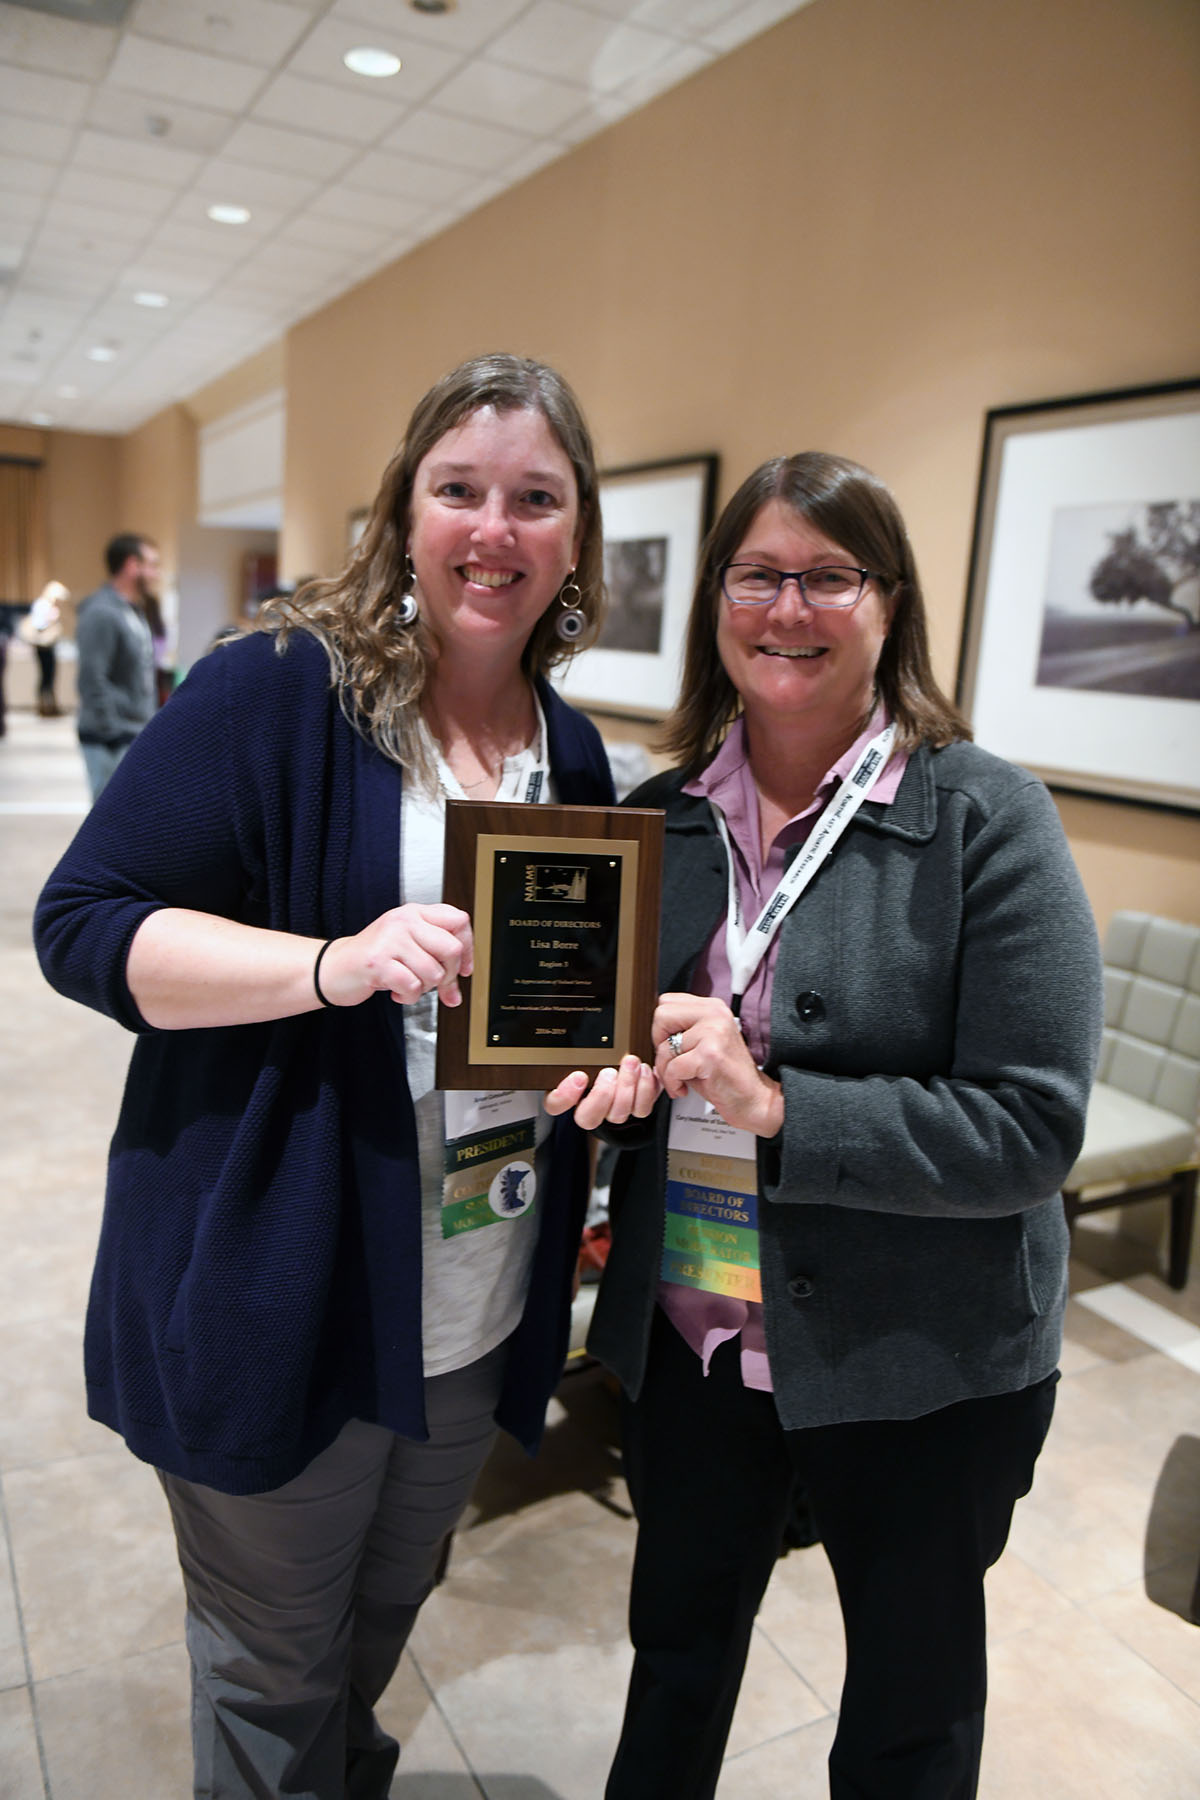 2019 President Sara Peel and Incoming President-Elect, Lisa Borre. Photo by Todd Tietjen.